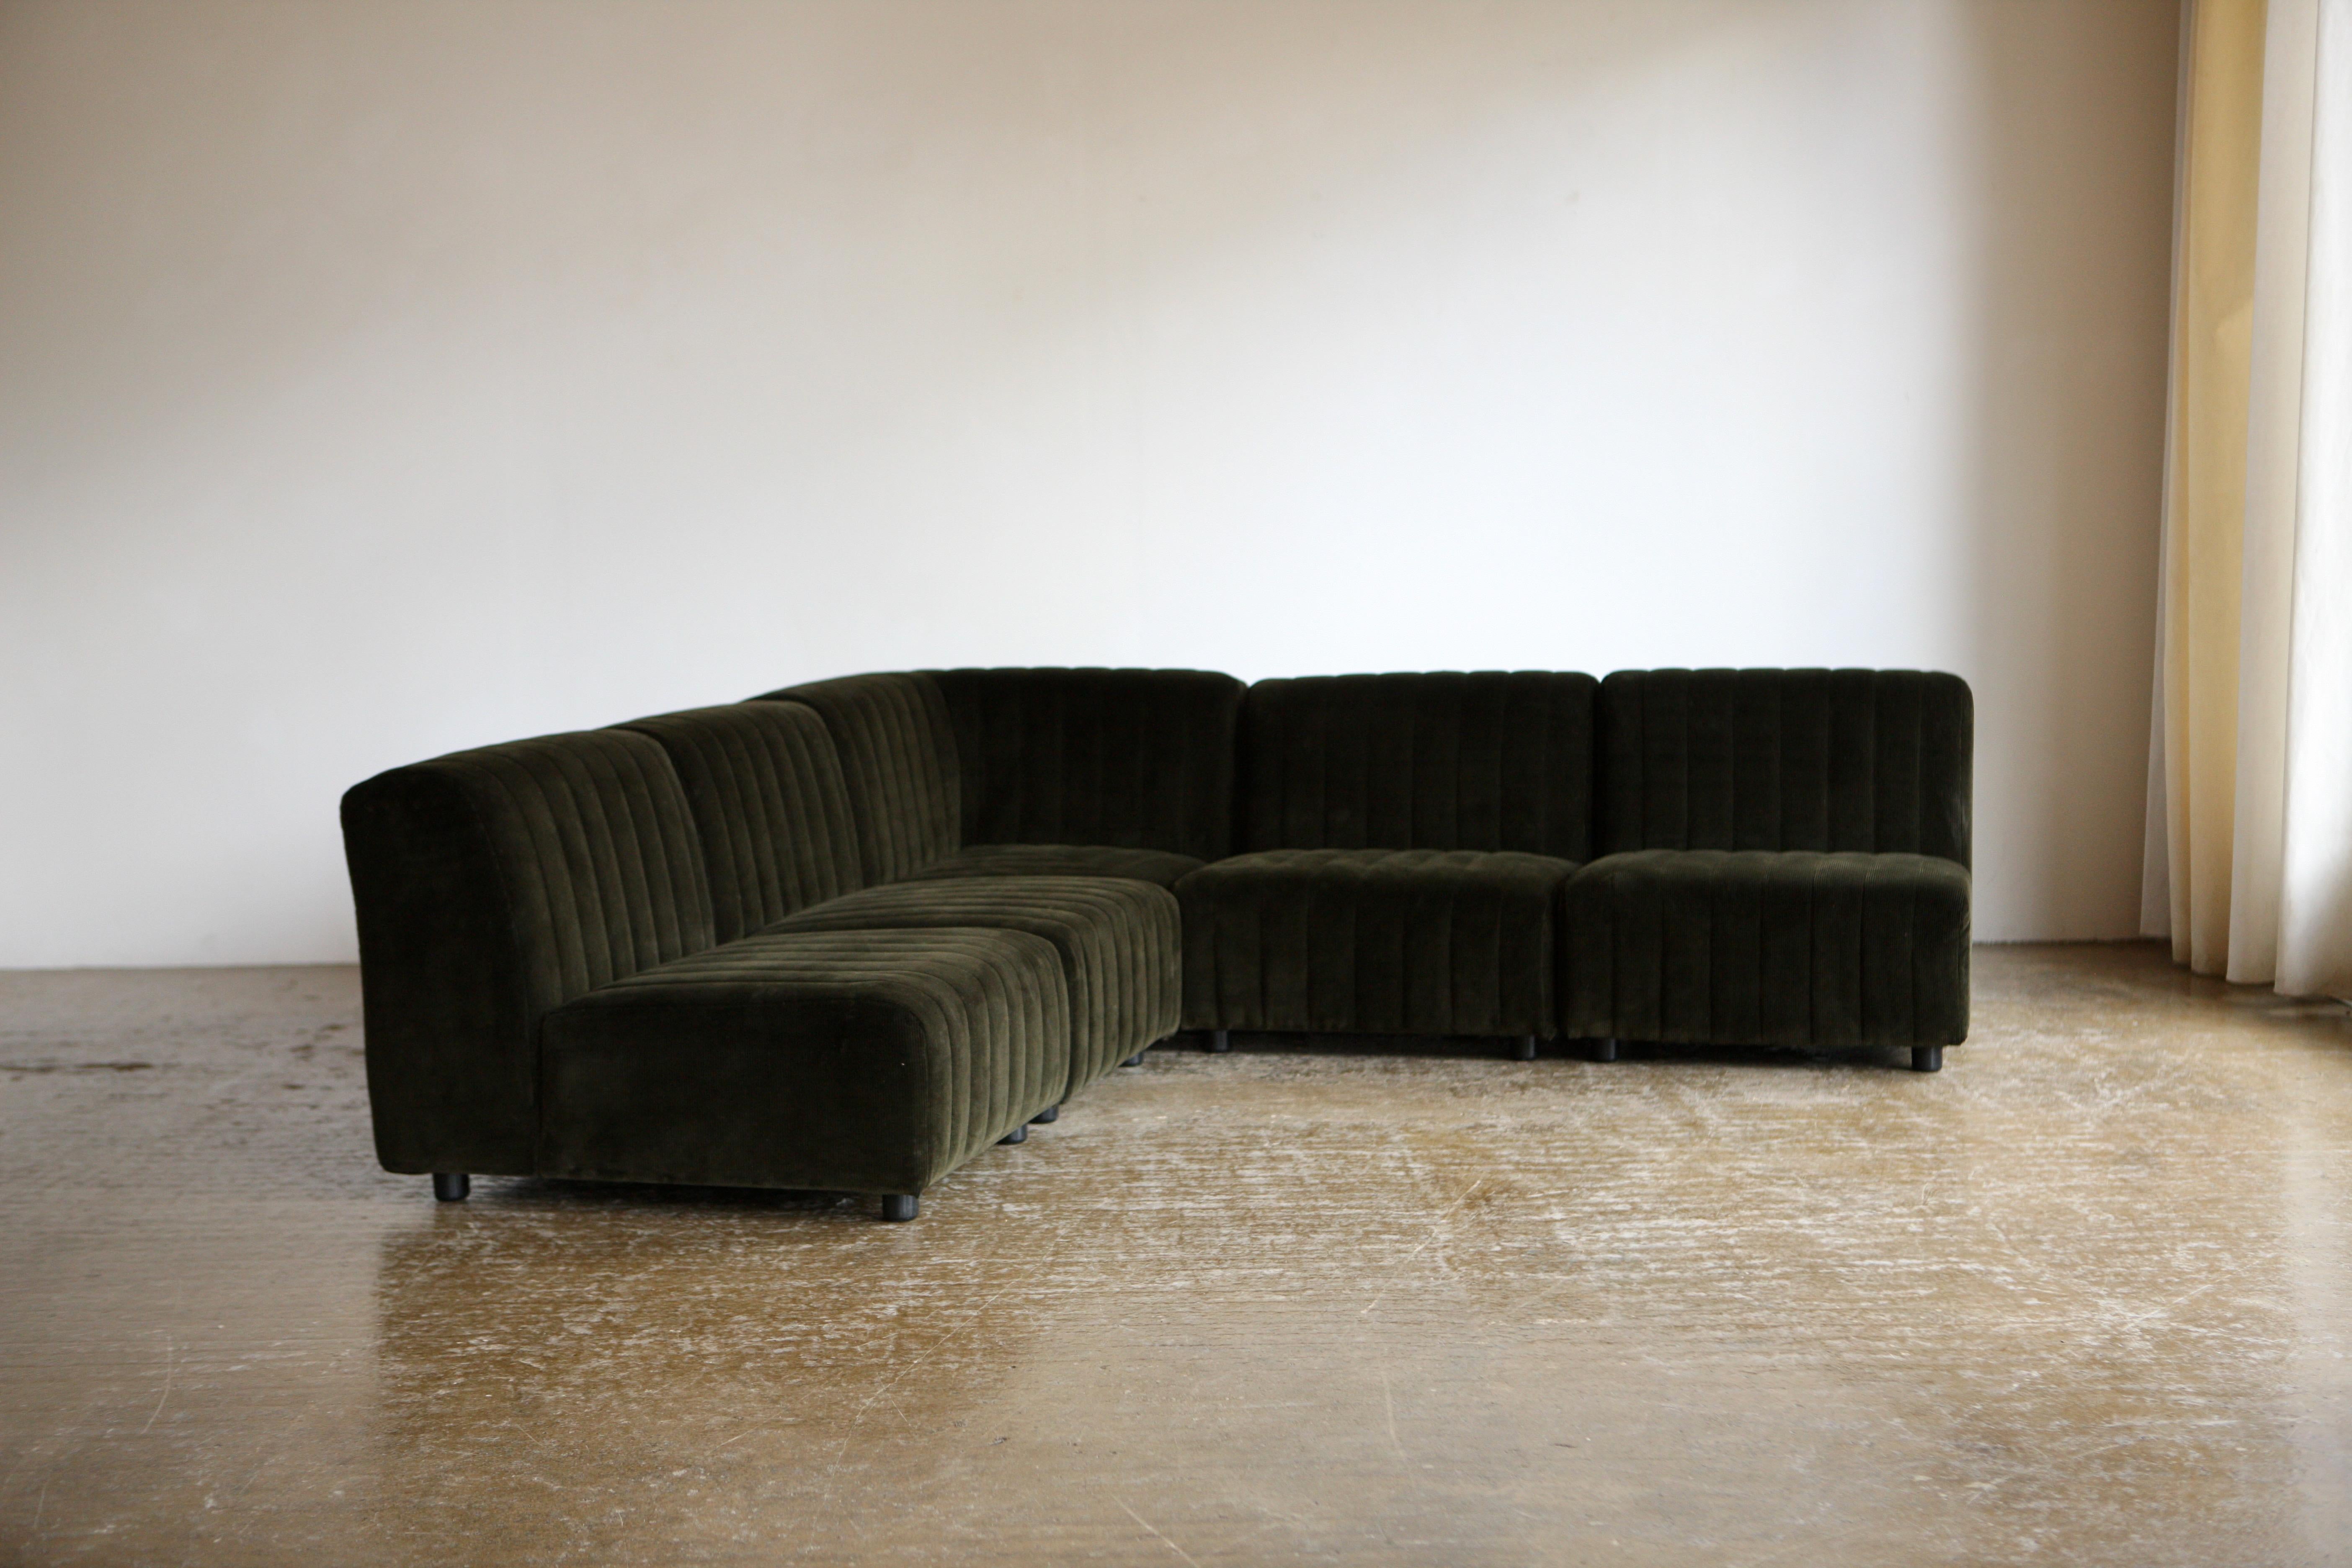 A modular 1970's Italian sofa which has been reupholstered relatively recently in Rose Uniacke bottle green cotton corduroy. The 5 piece elemental sofa has multiple configurations.
